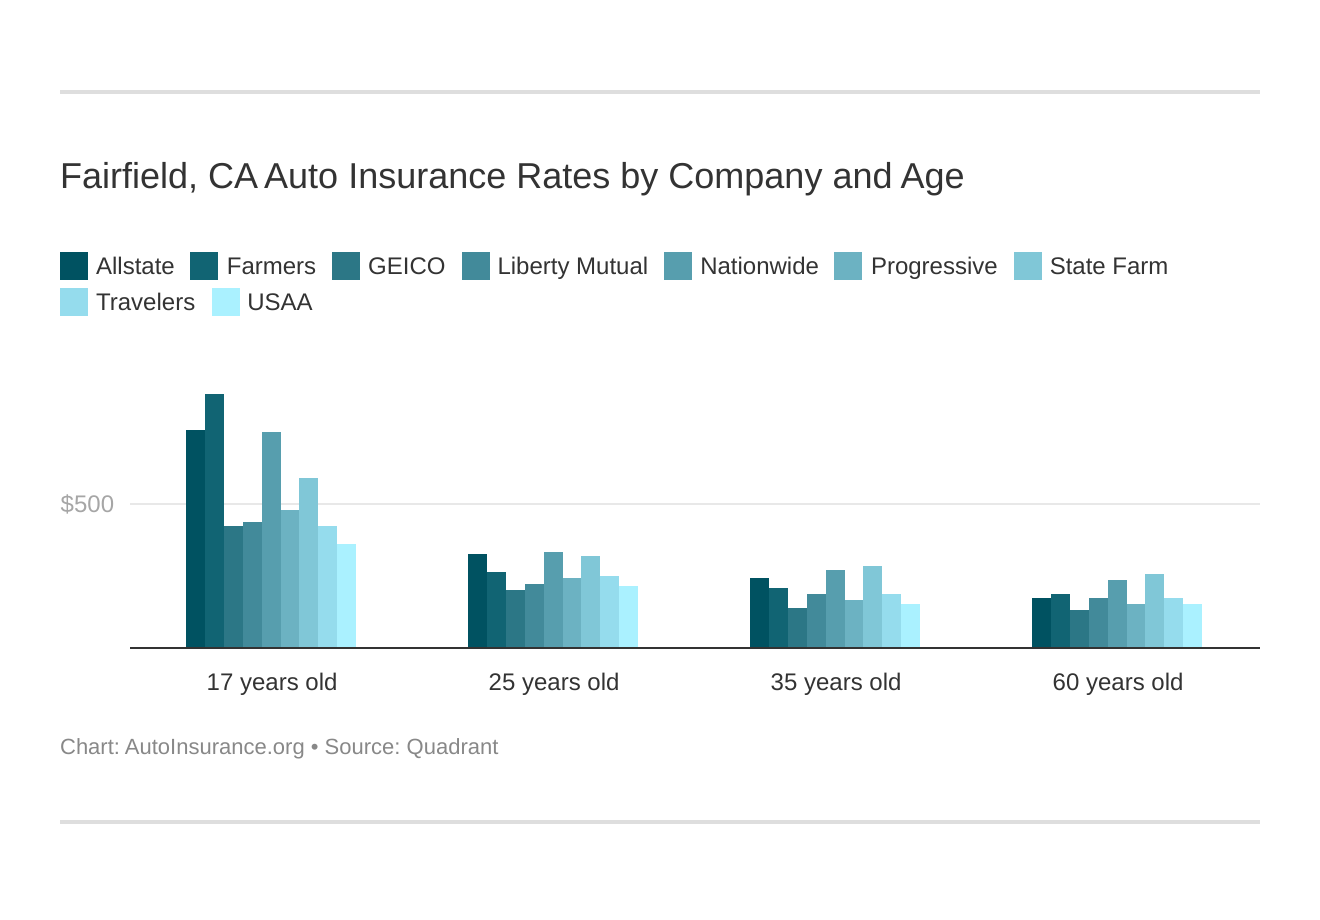 Fairfield, CA Auto Insurance Rates by Company and Age